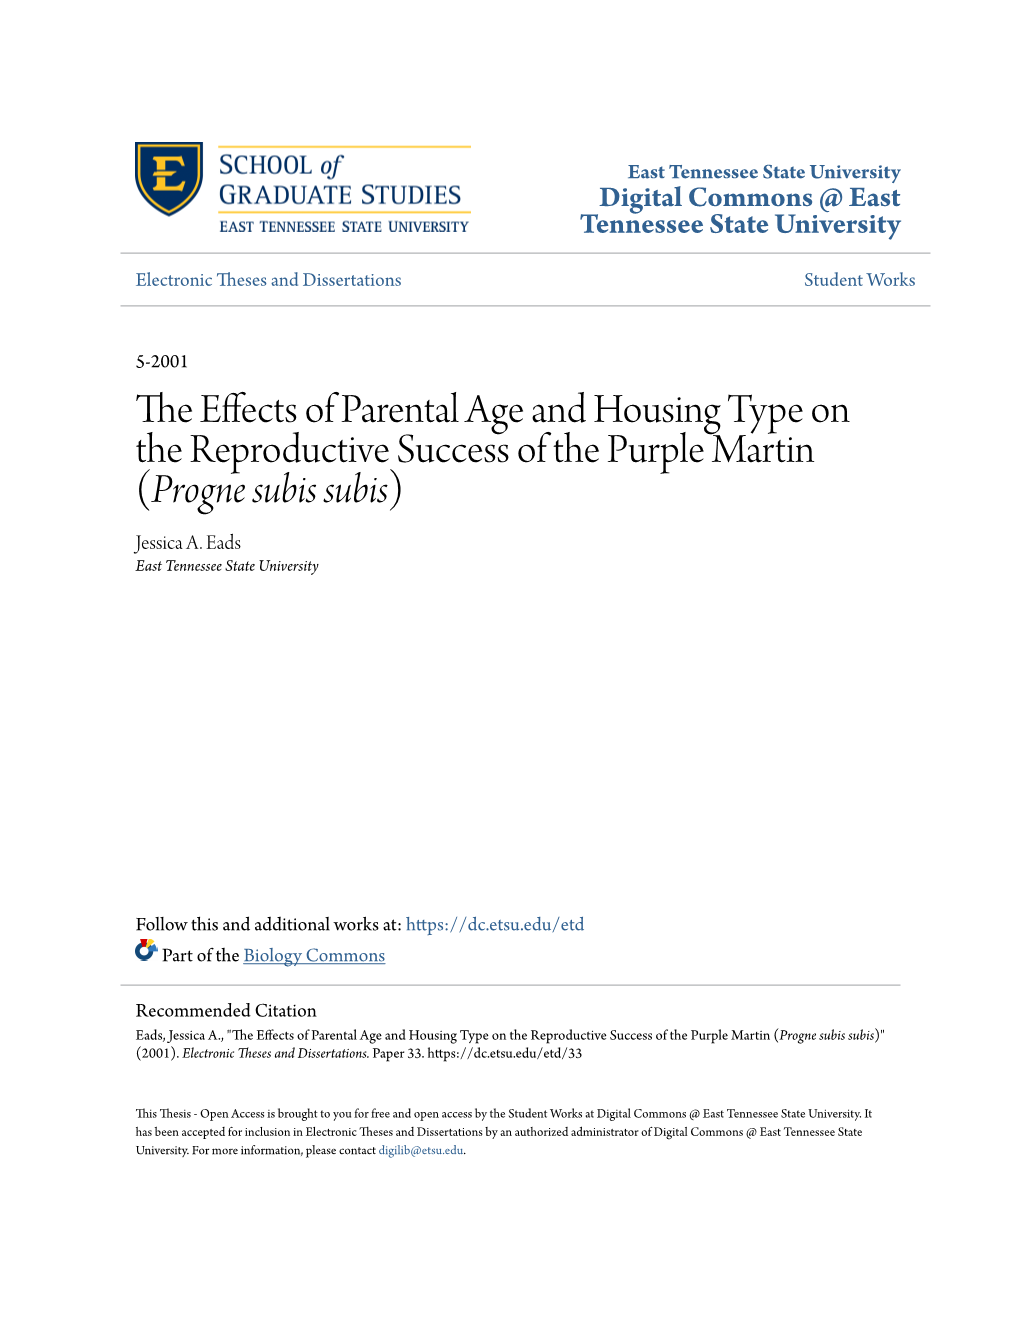 The Effects of Parental Age and Housing Type on the Reproductive Success of the Purple Martin (Progne Subis Subis)" (2001)